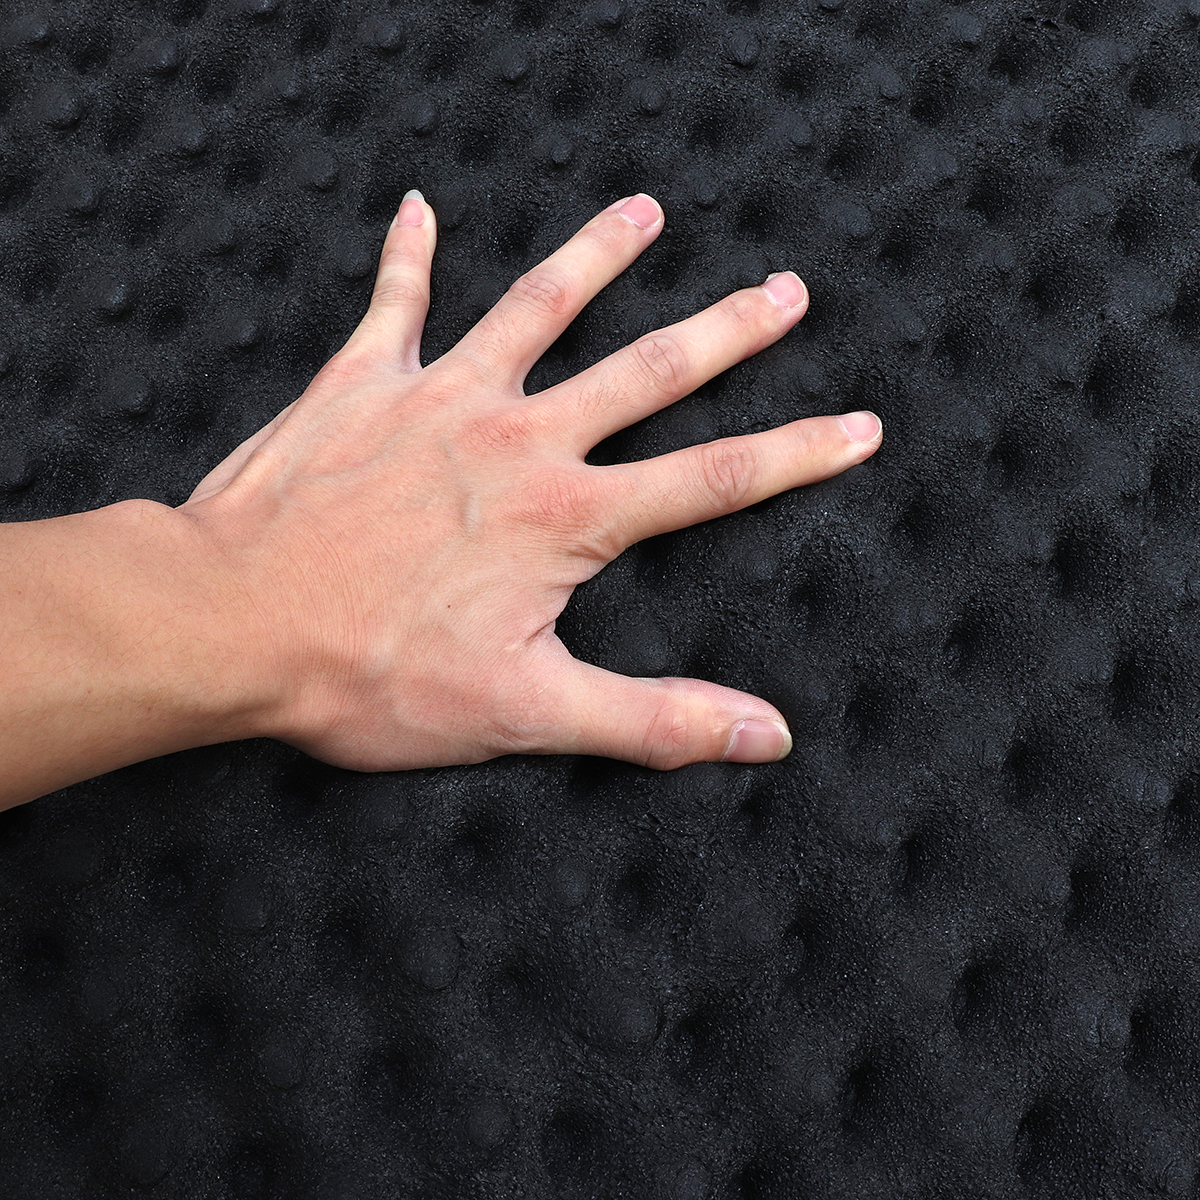 100x100cm-Car-SoundProof-Closed-Cell-Foam-Self-Adhesive-Acoustic-Foam-Thermal-Insulation-Waterproof-1382928